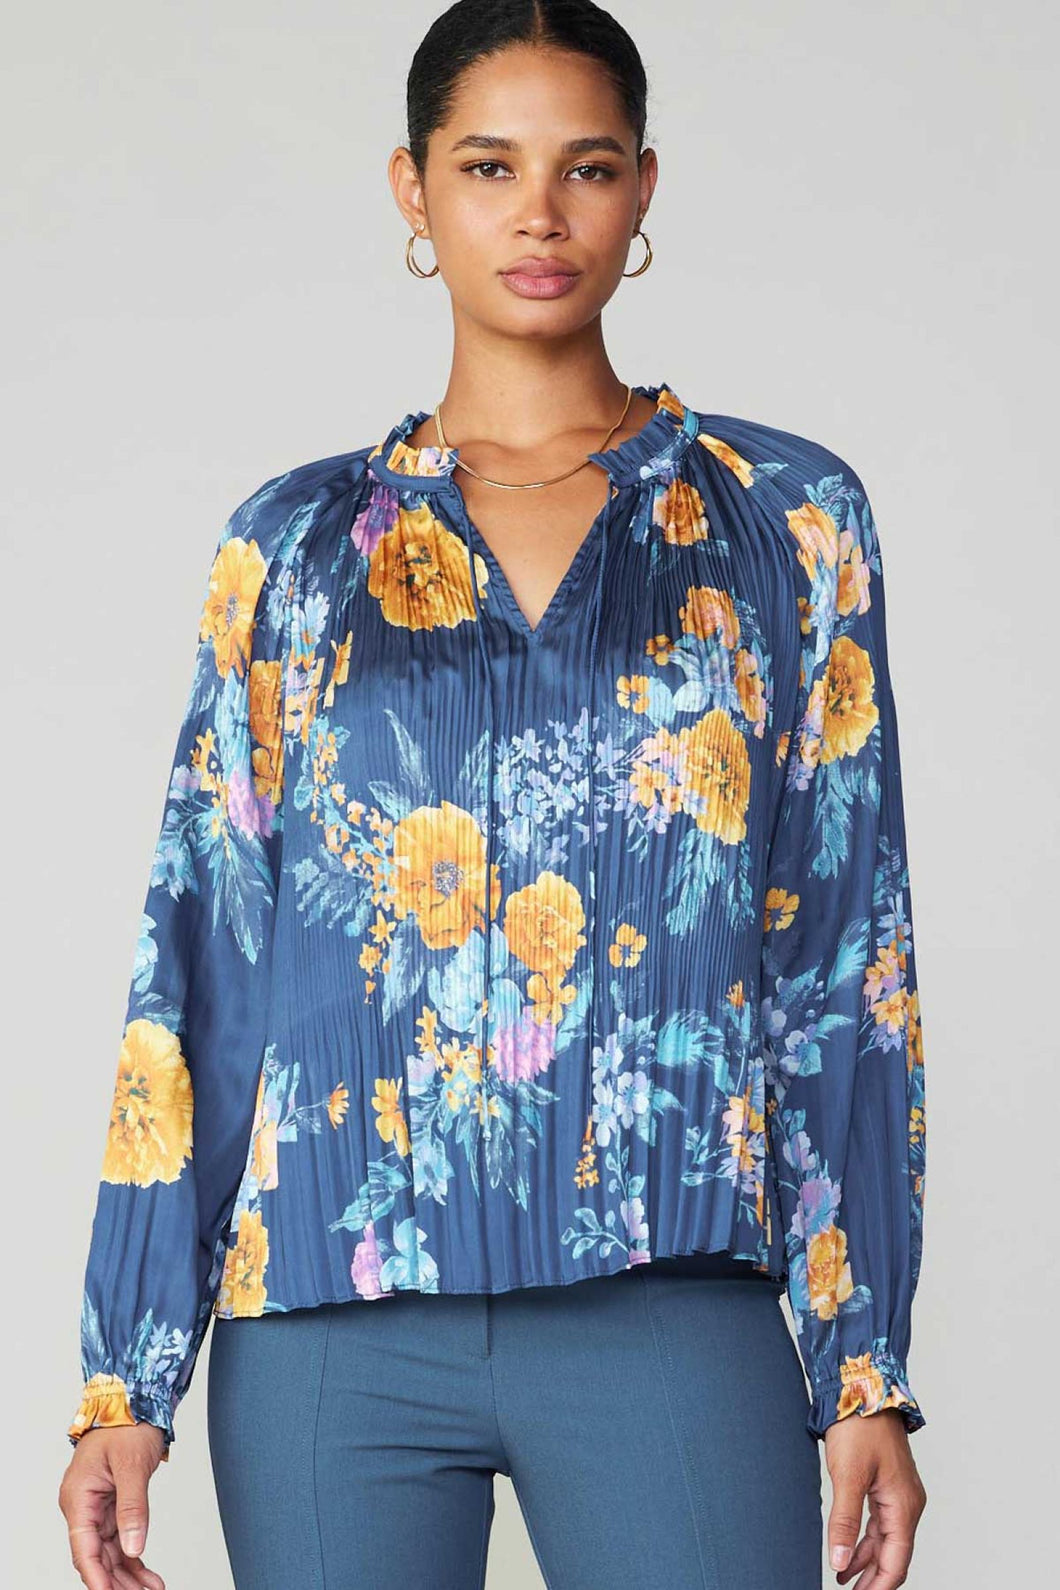 A stylish blue floral blouse with a flattering v-neck design. Perfect for a trendy and feminine look.